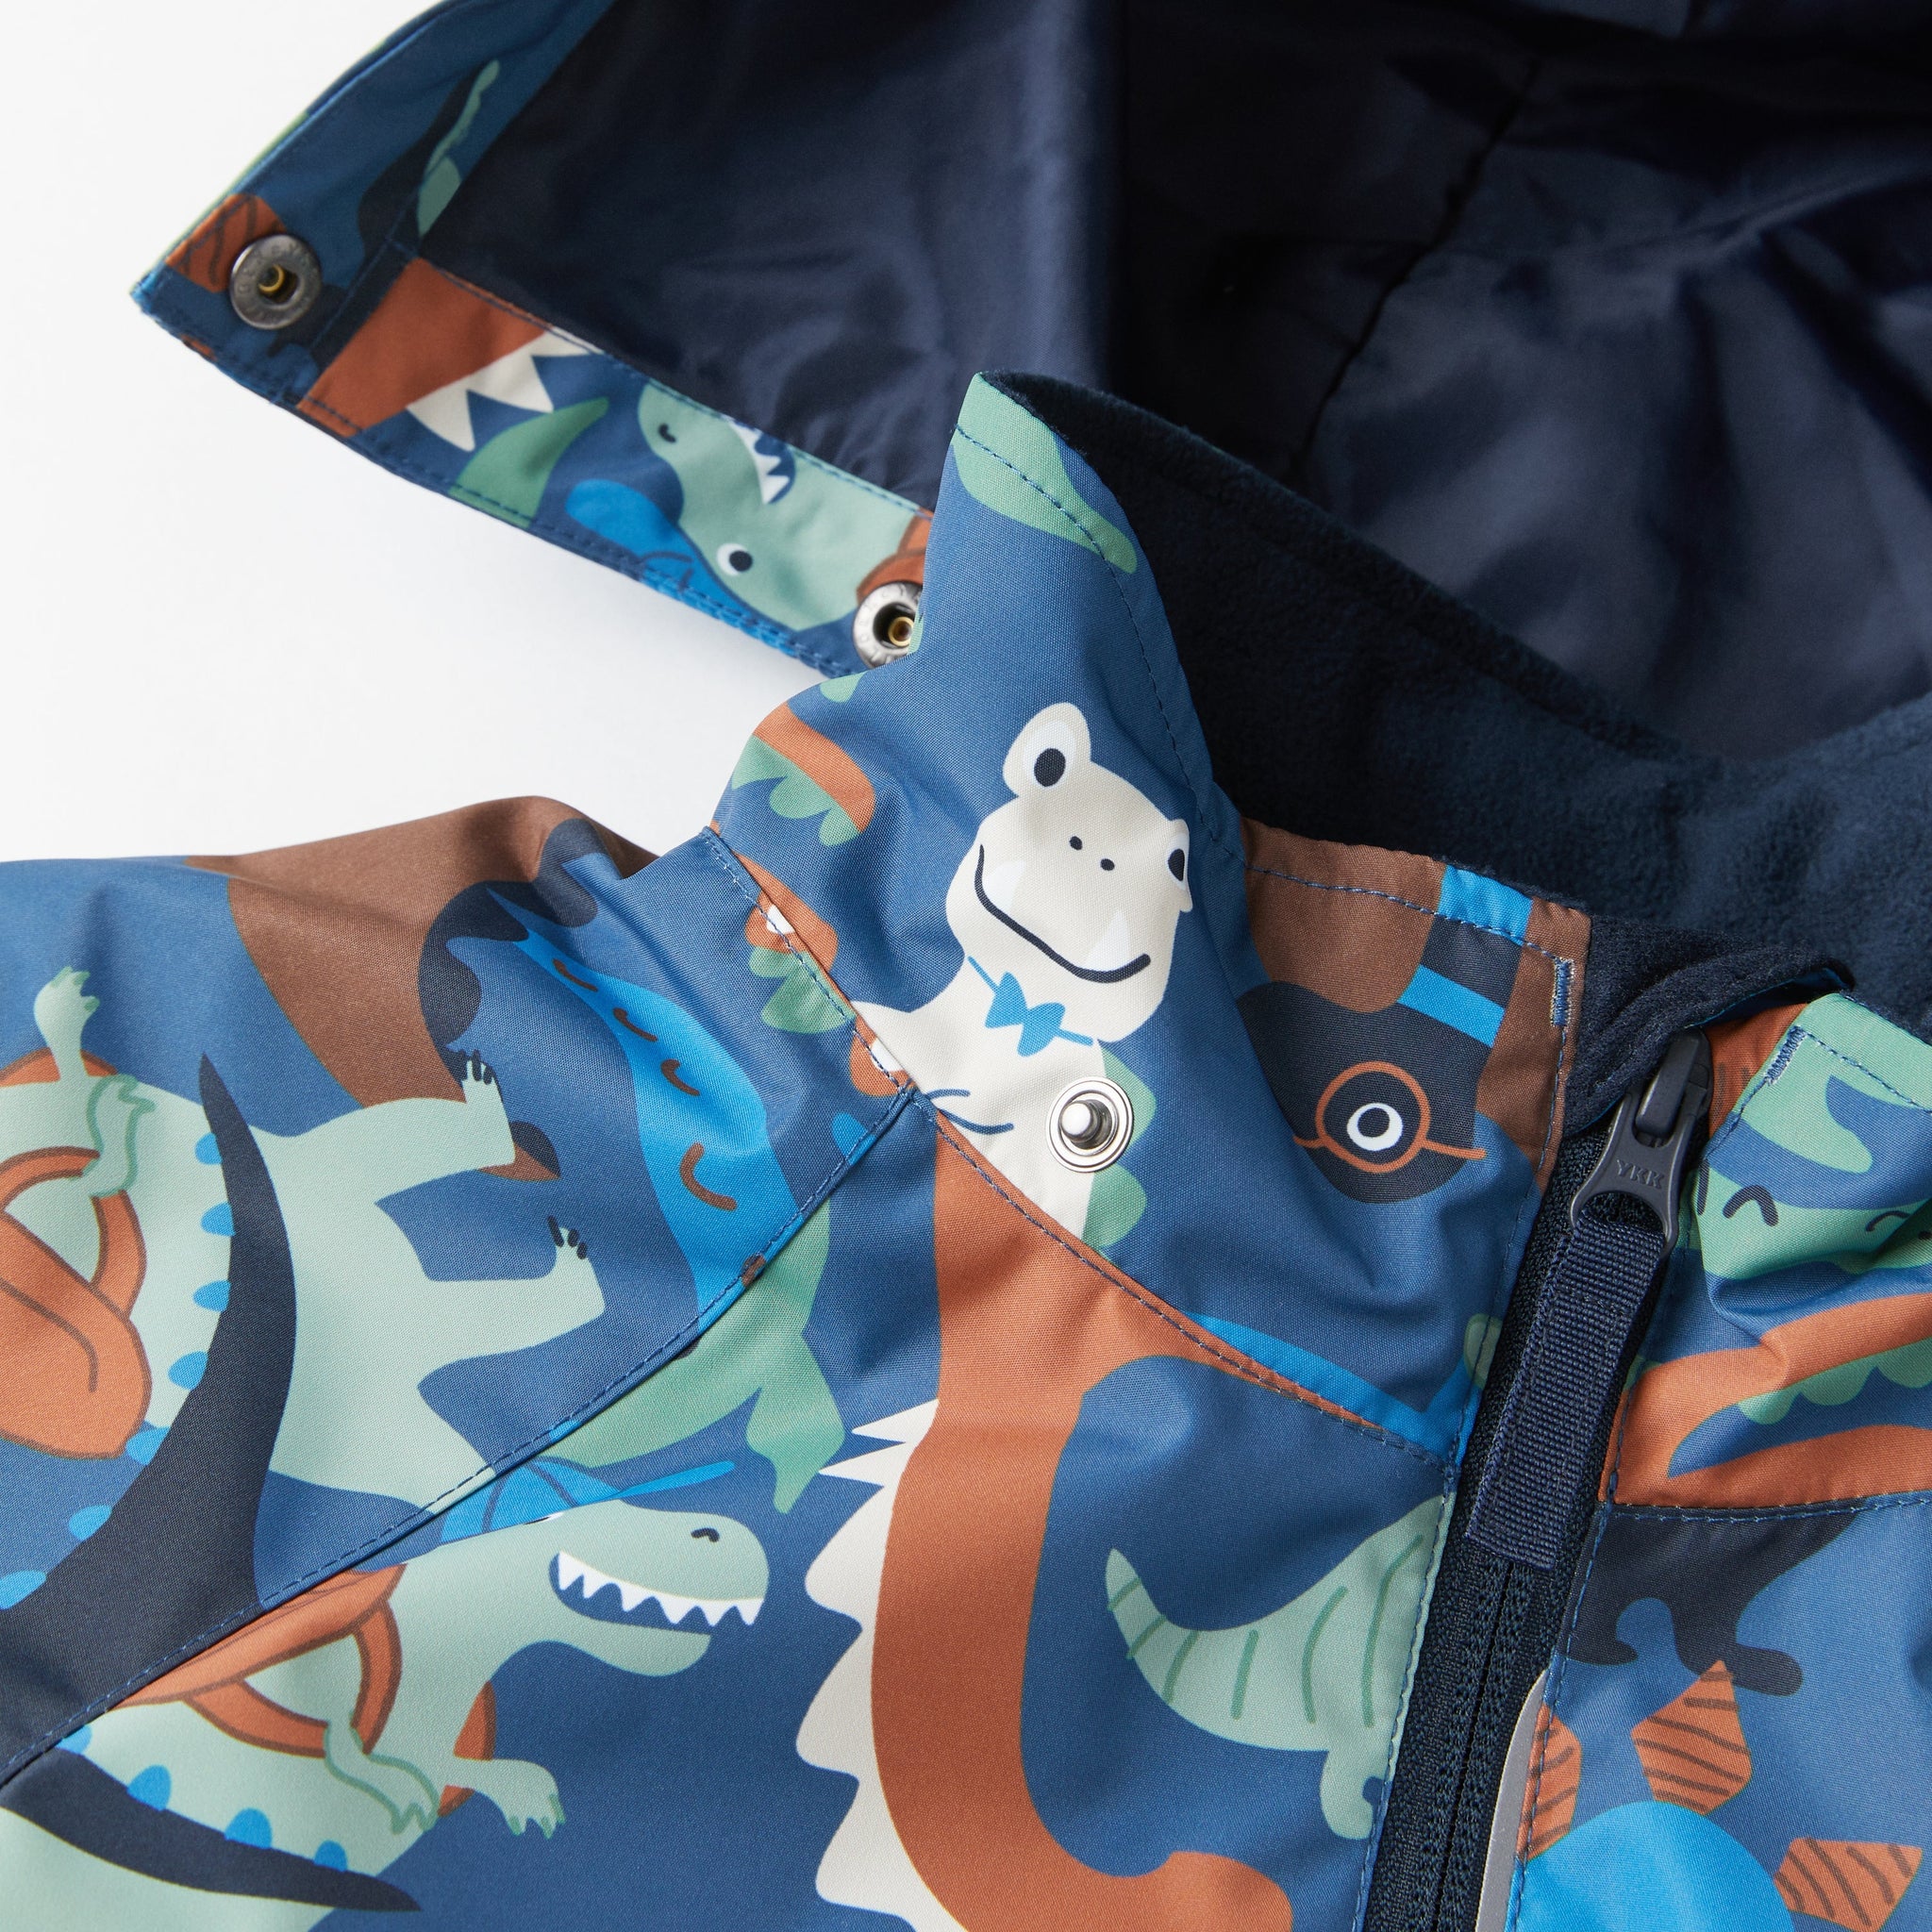 Dinosaur Print Kids Waterproof Coat from the Polarn O. Pyret kidswear collection. Made from sustainable sources.